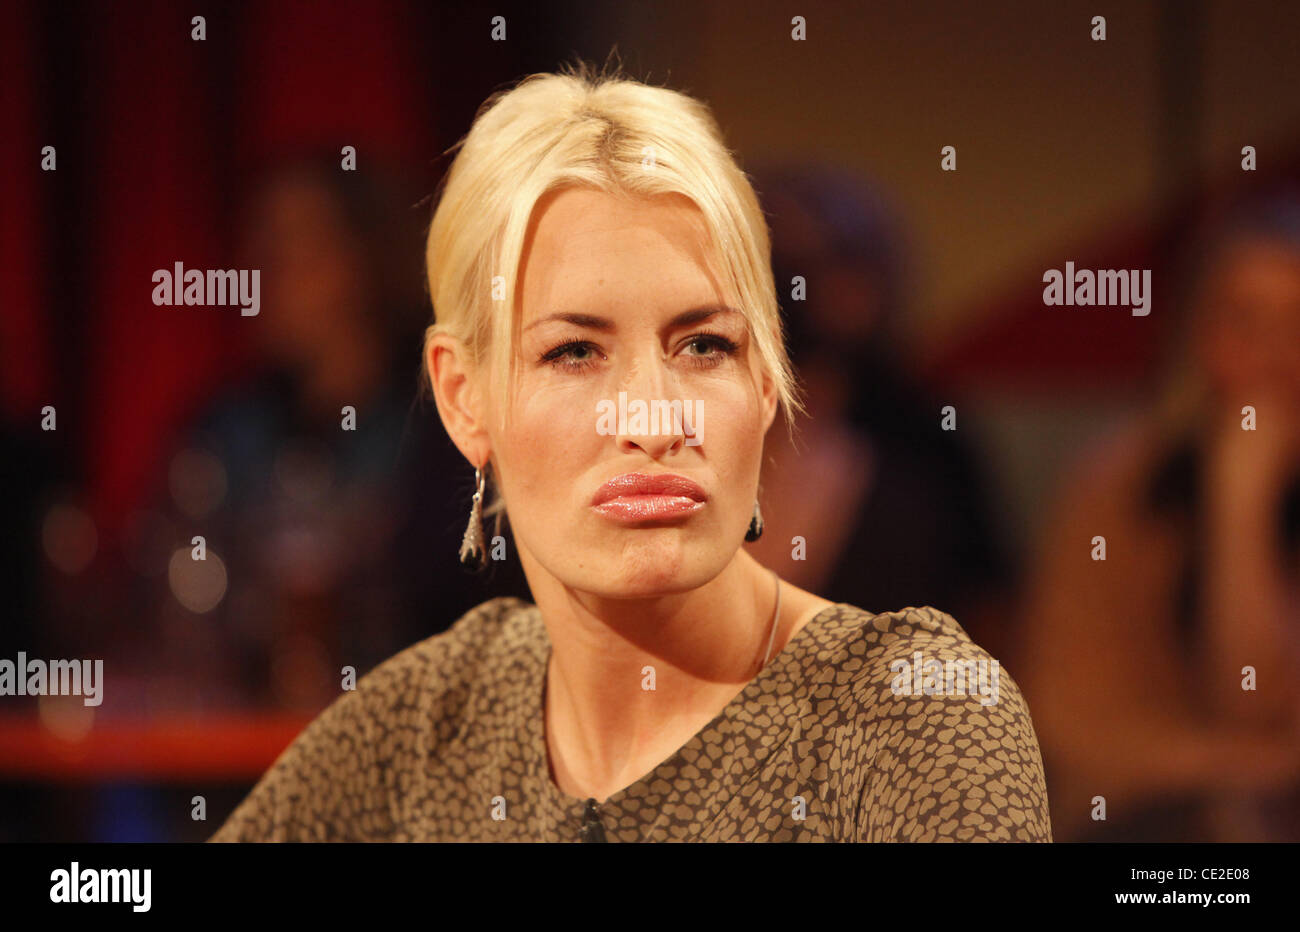 Sarah Connor making a funny face on German talkshow '3 nach 9'. Bremen, Germany - 29.10.2010 Stock Photo